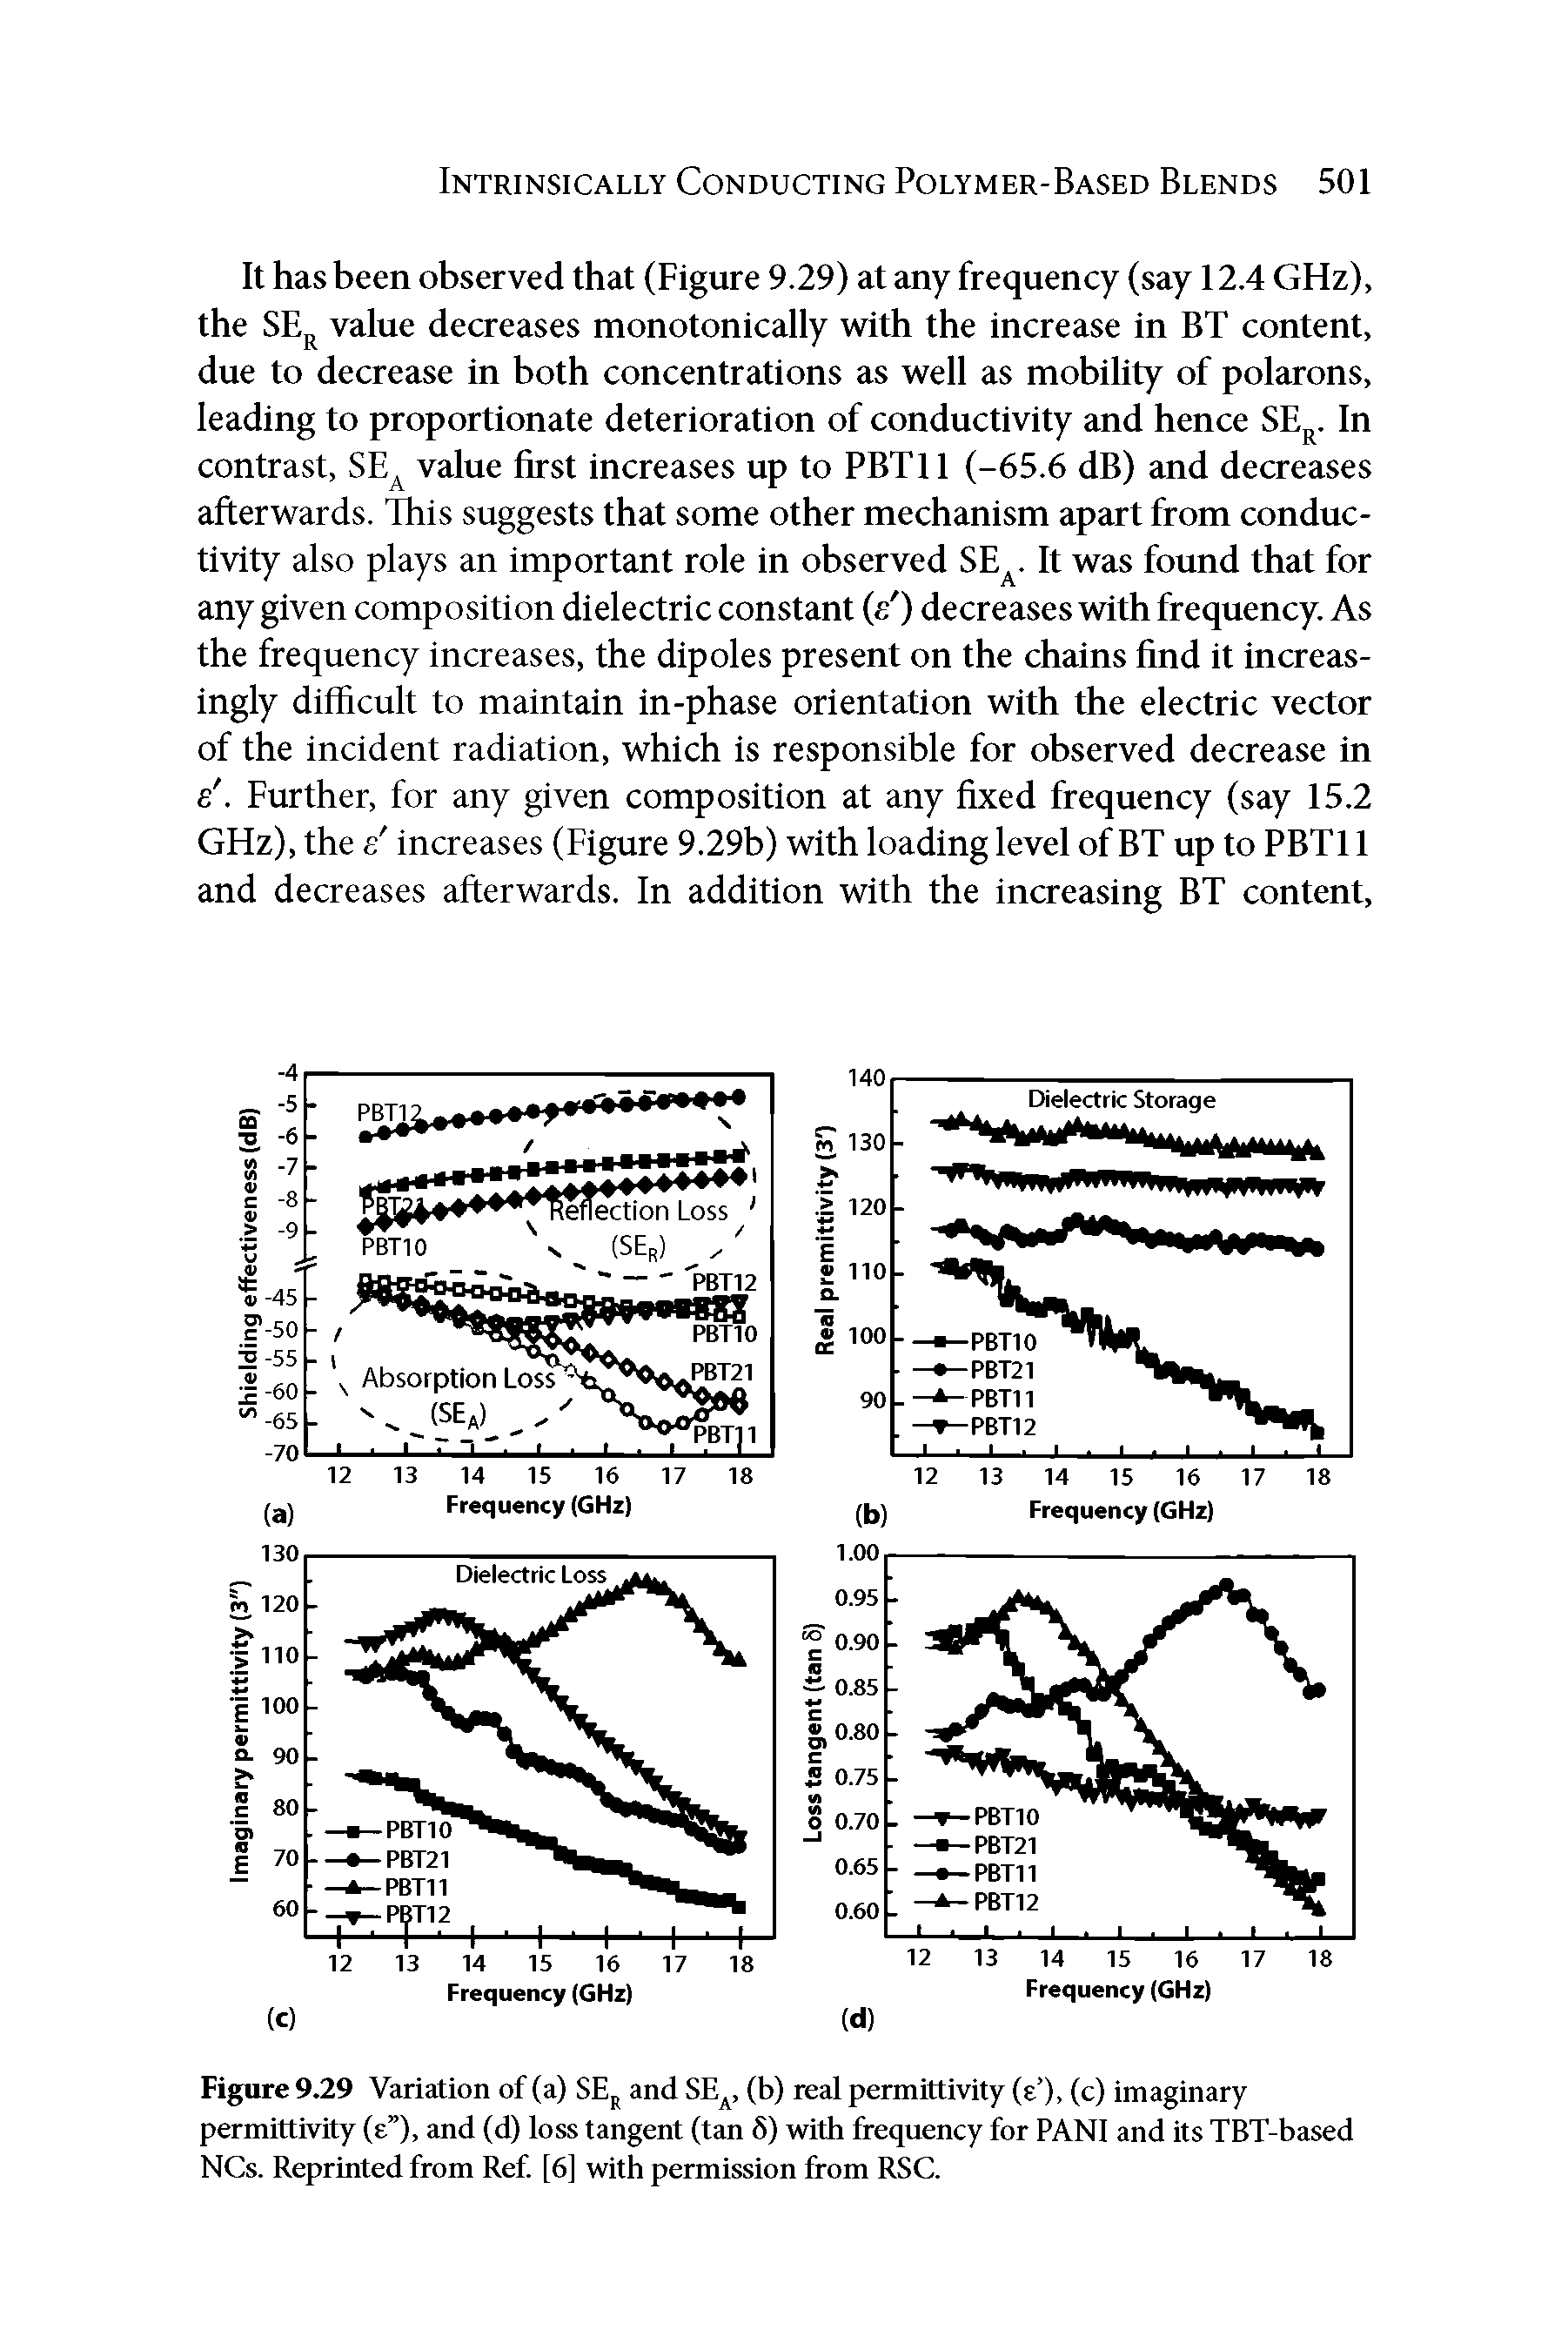 Figure 9.29 Variation of (a) SE and SE, (b) real permittivity (e ), (c) imaginary permittivity (e ), and (d) loss tangent (tan 6) with frequency for PANl and its TBT-based NCs. Reprinted from Ref [6] with permission from RSC.